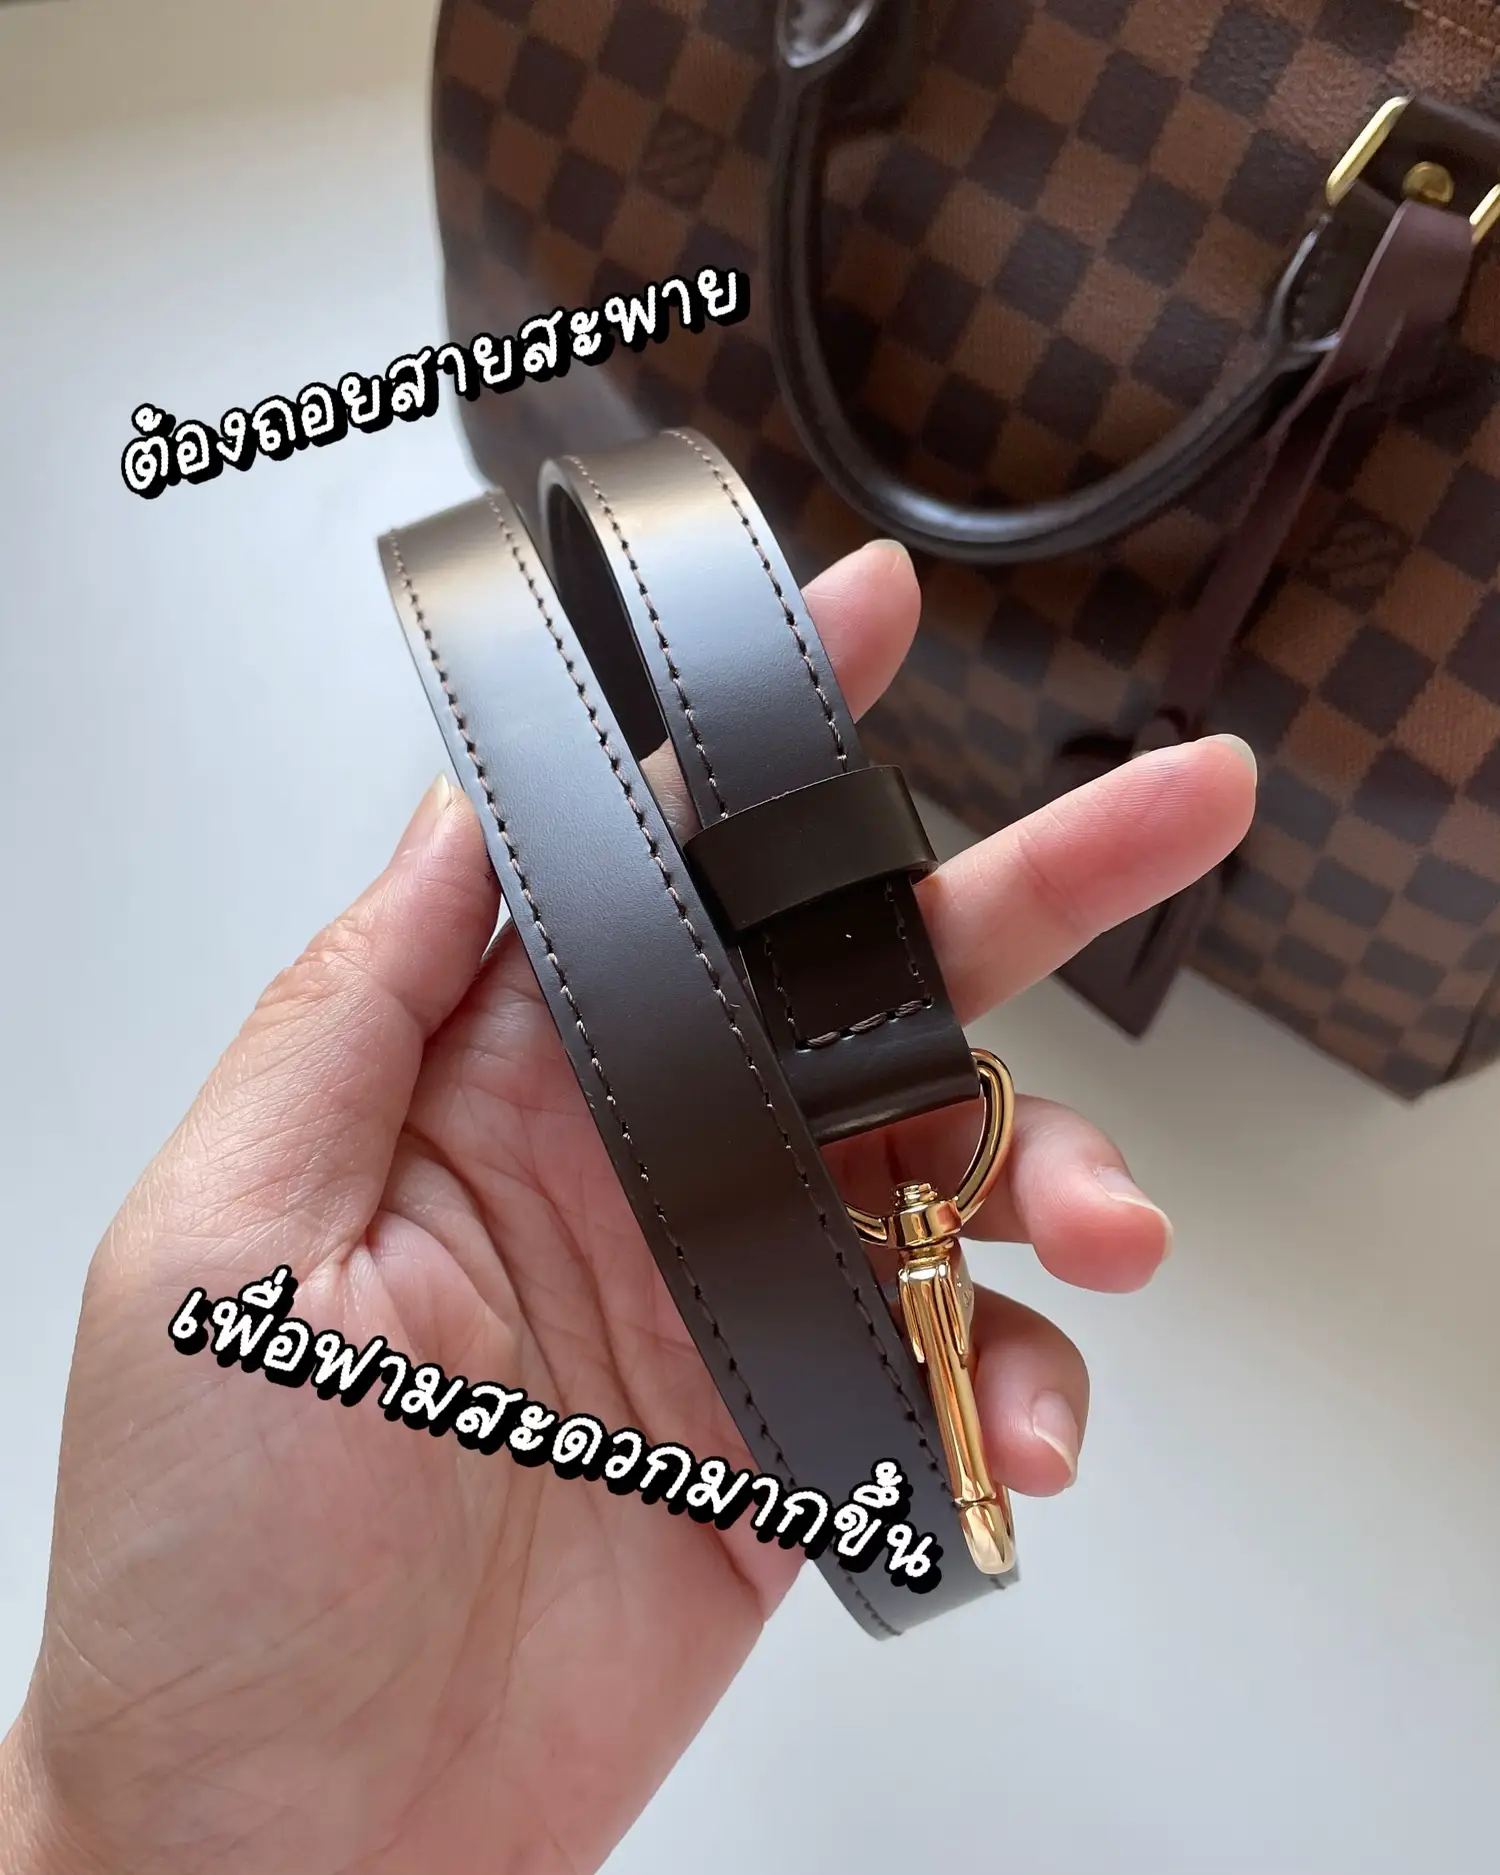 How To Attach Strap To Louis Vuitton Bag